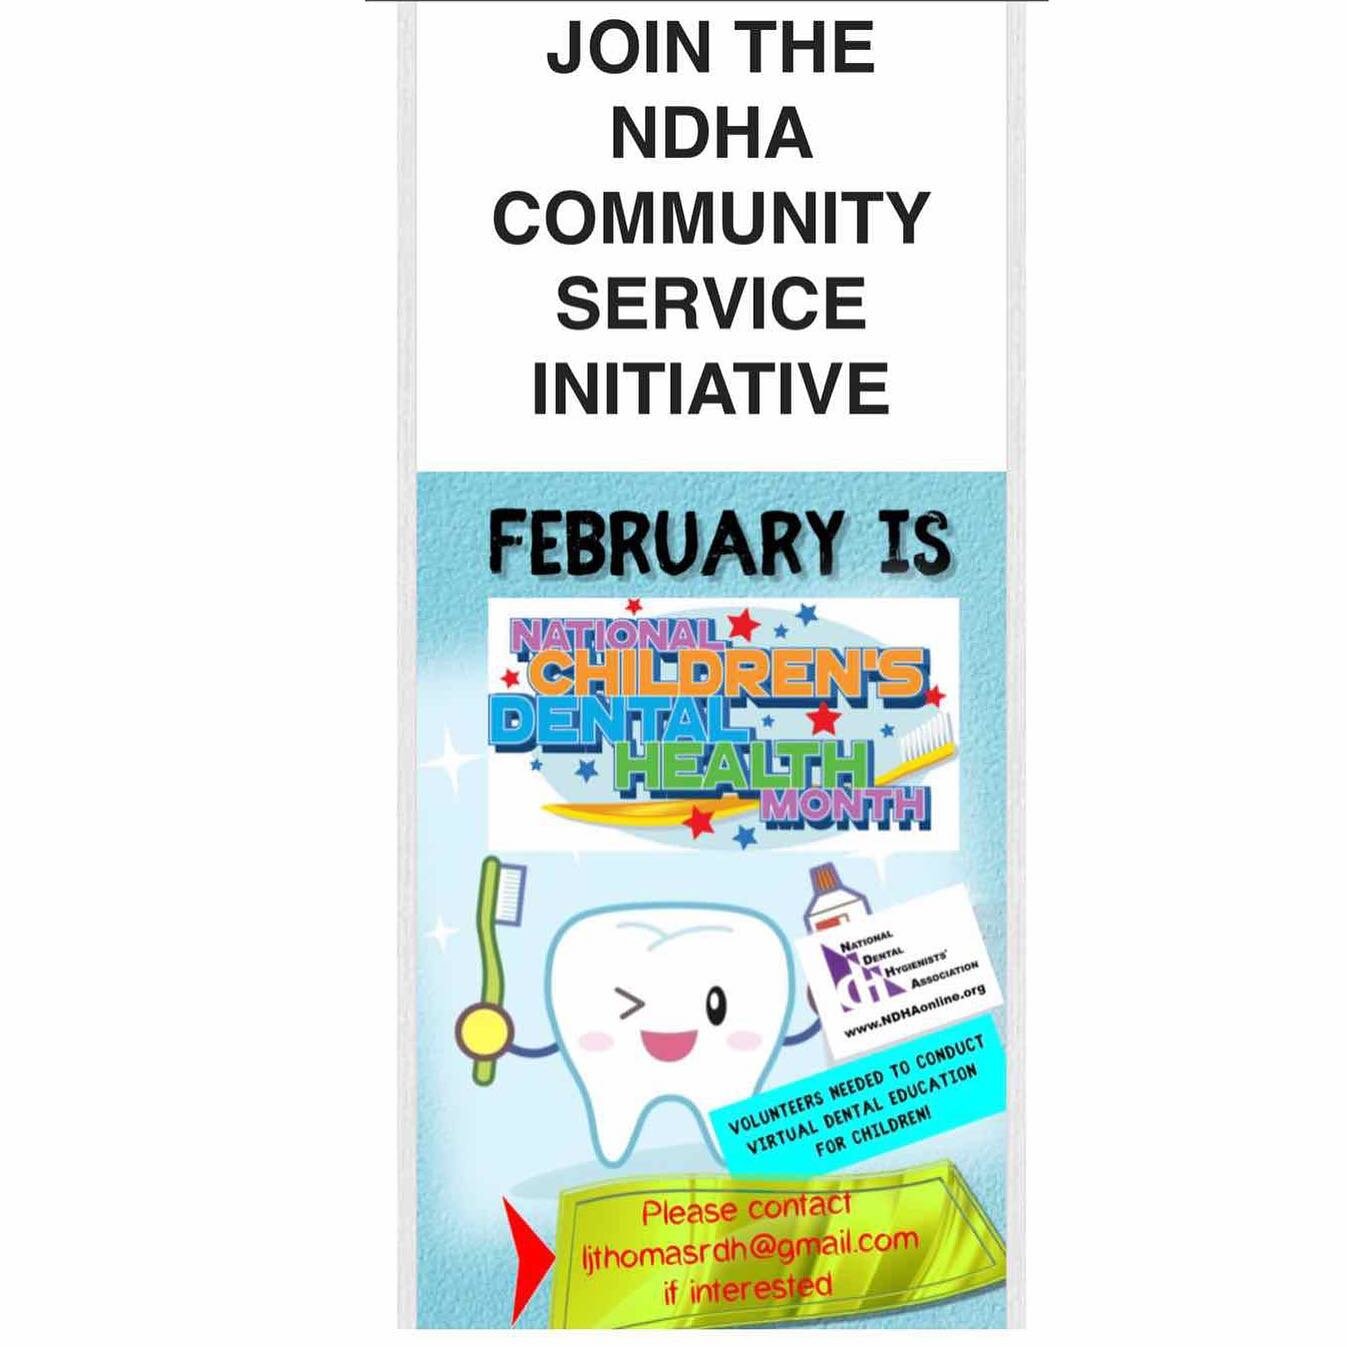 Join by volunteering with NDHA Community Service Initiative in February. We will be providing virtual dental education for children. #communityservice #dentalcommunity  #ndha #hygenist #vituallearning #volunteersneeded